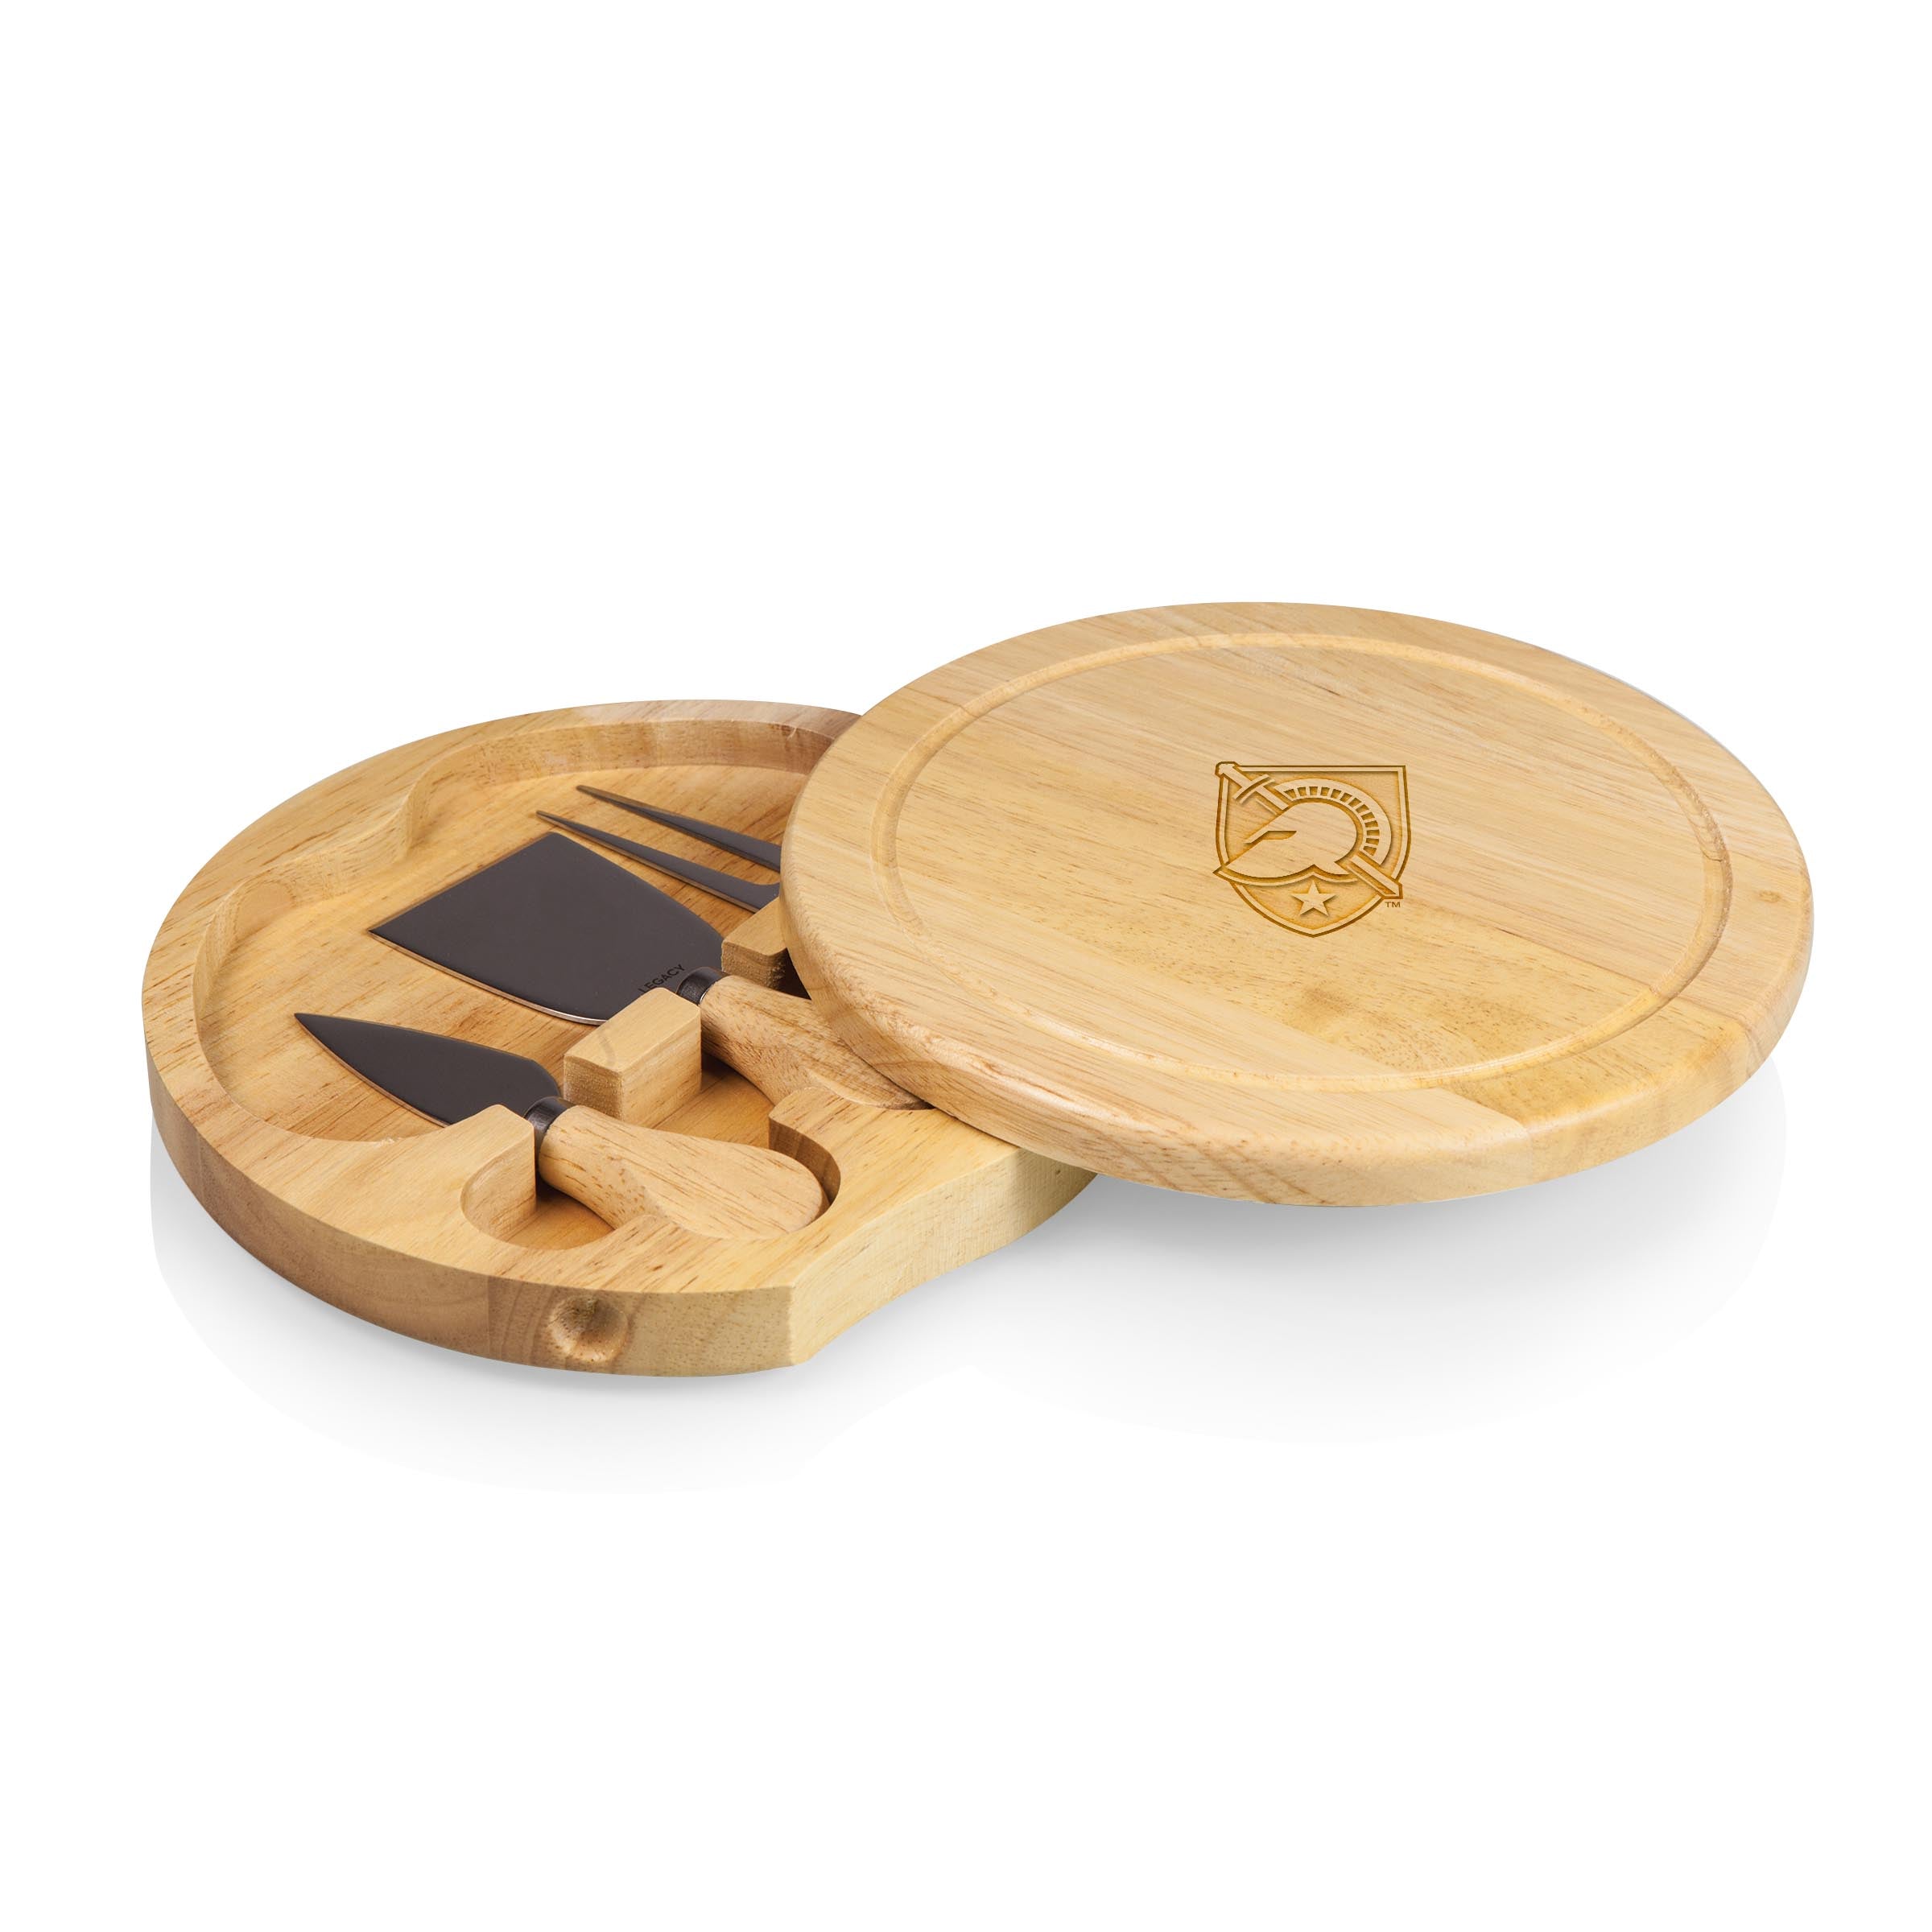 West Point Black Knights - Brie Cheese Cutting Board & Tools Set